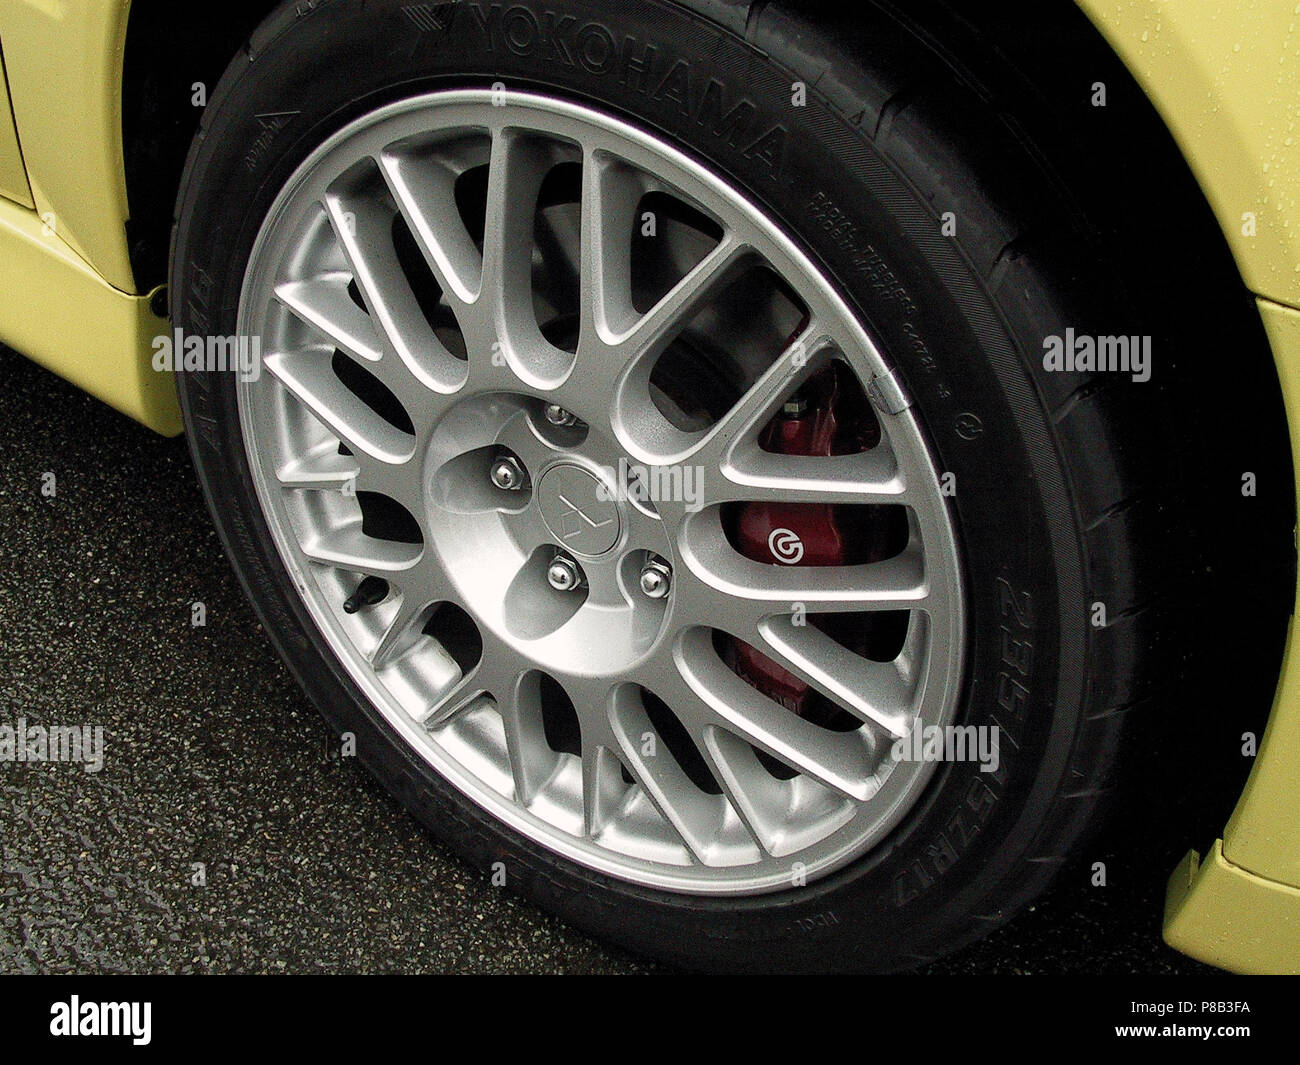 Mitsubishi Lancer Evolution 7 vii EVO - 2002 model in lightening yellow  colour - showing close up of alloy wheels and brakes Stock Photo - Alamy